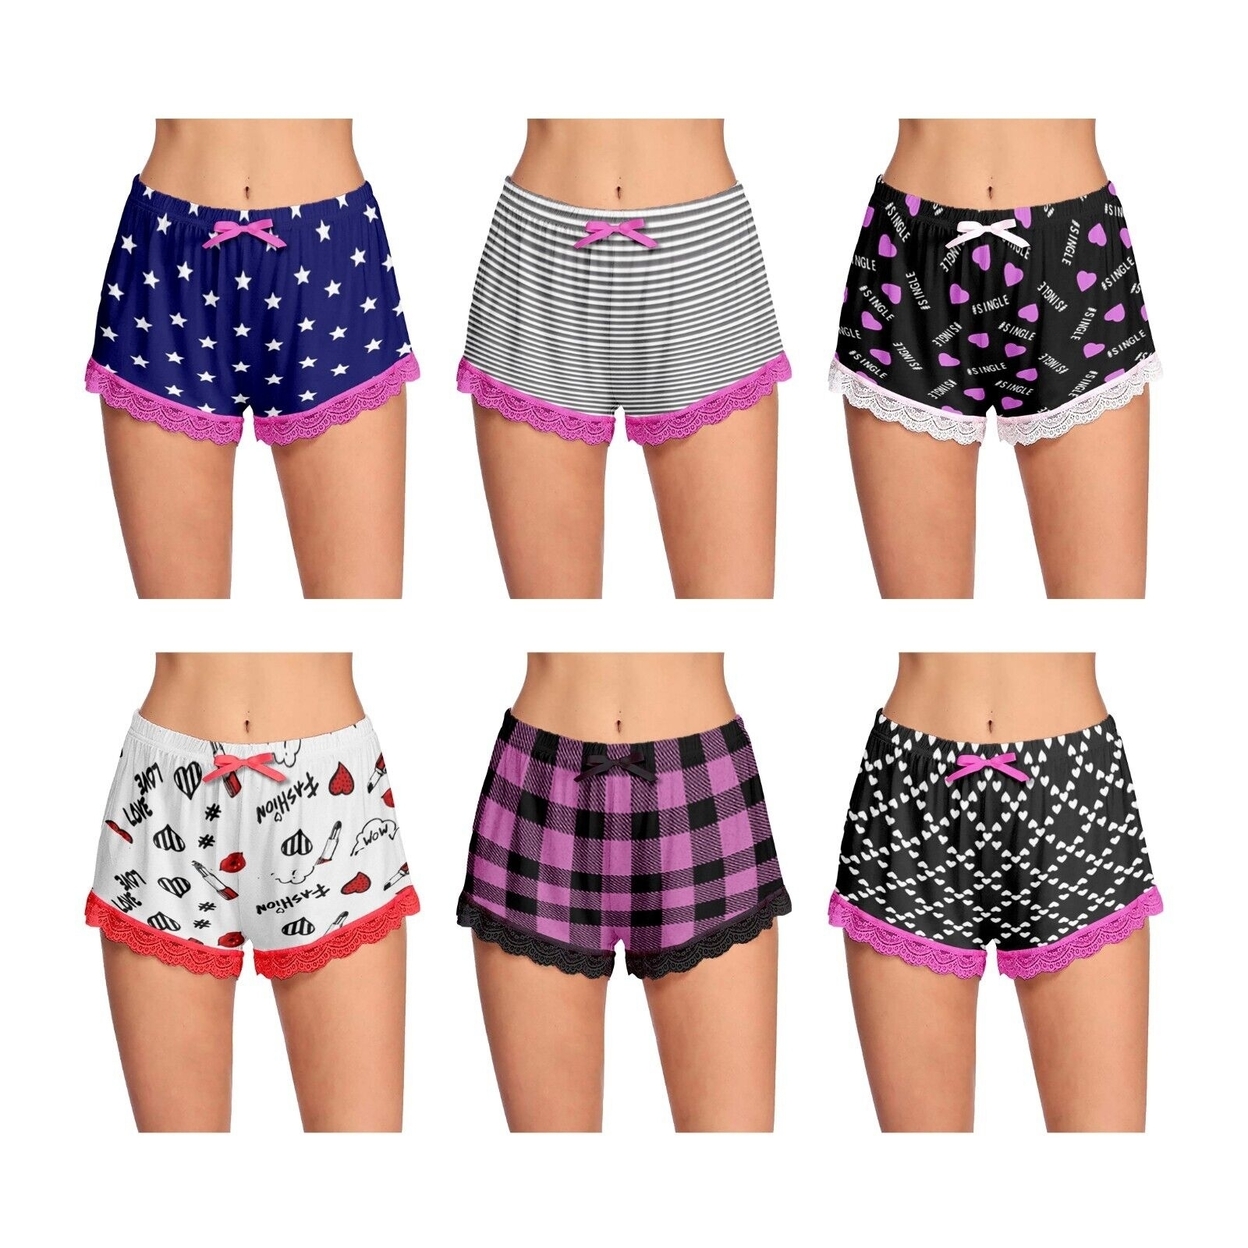 6-Pack: Women's Ultra-Soft Cozy Fun Printed Lace Trim Pajama Lounge Shorts - X-large, Shapes